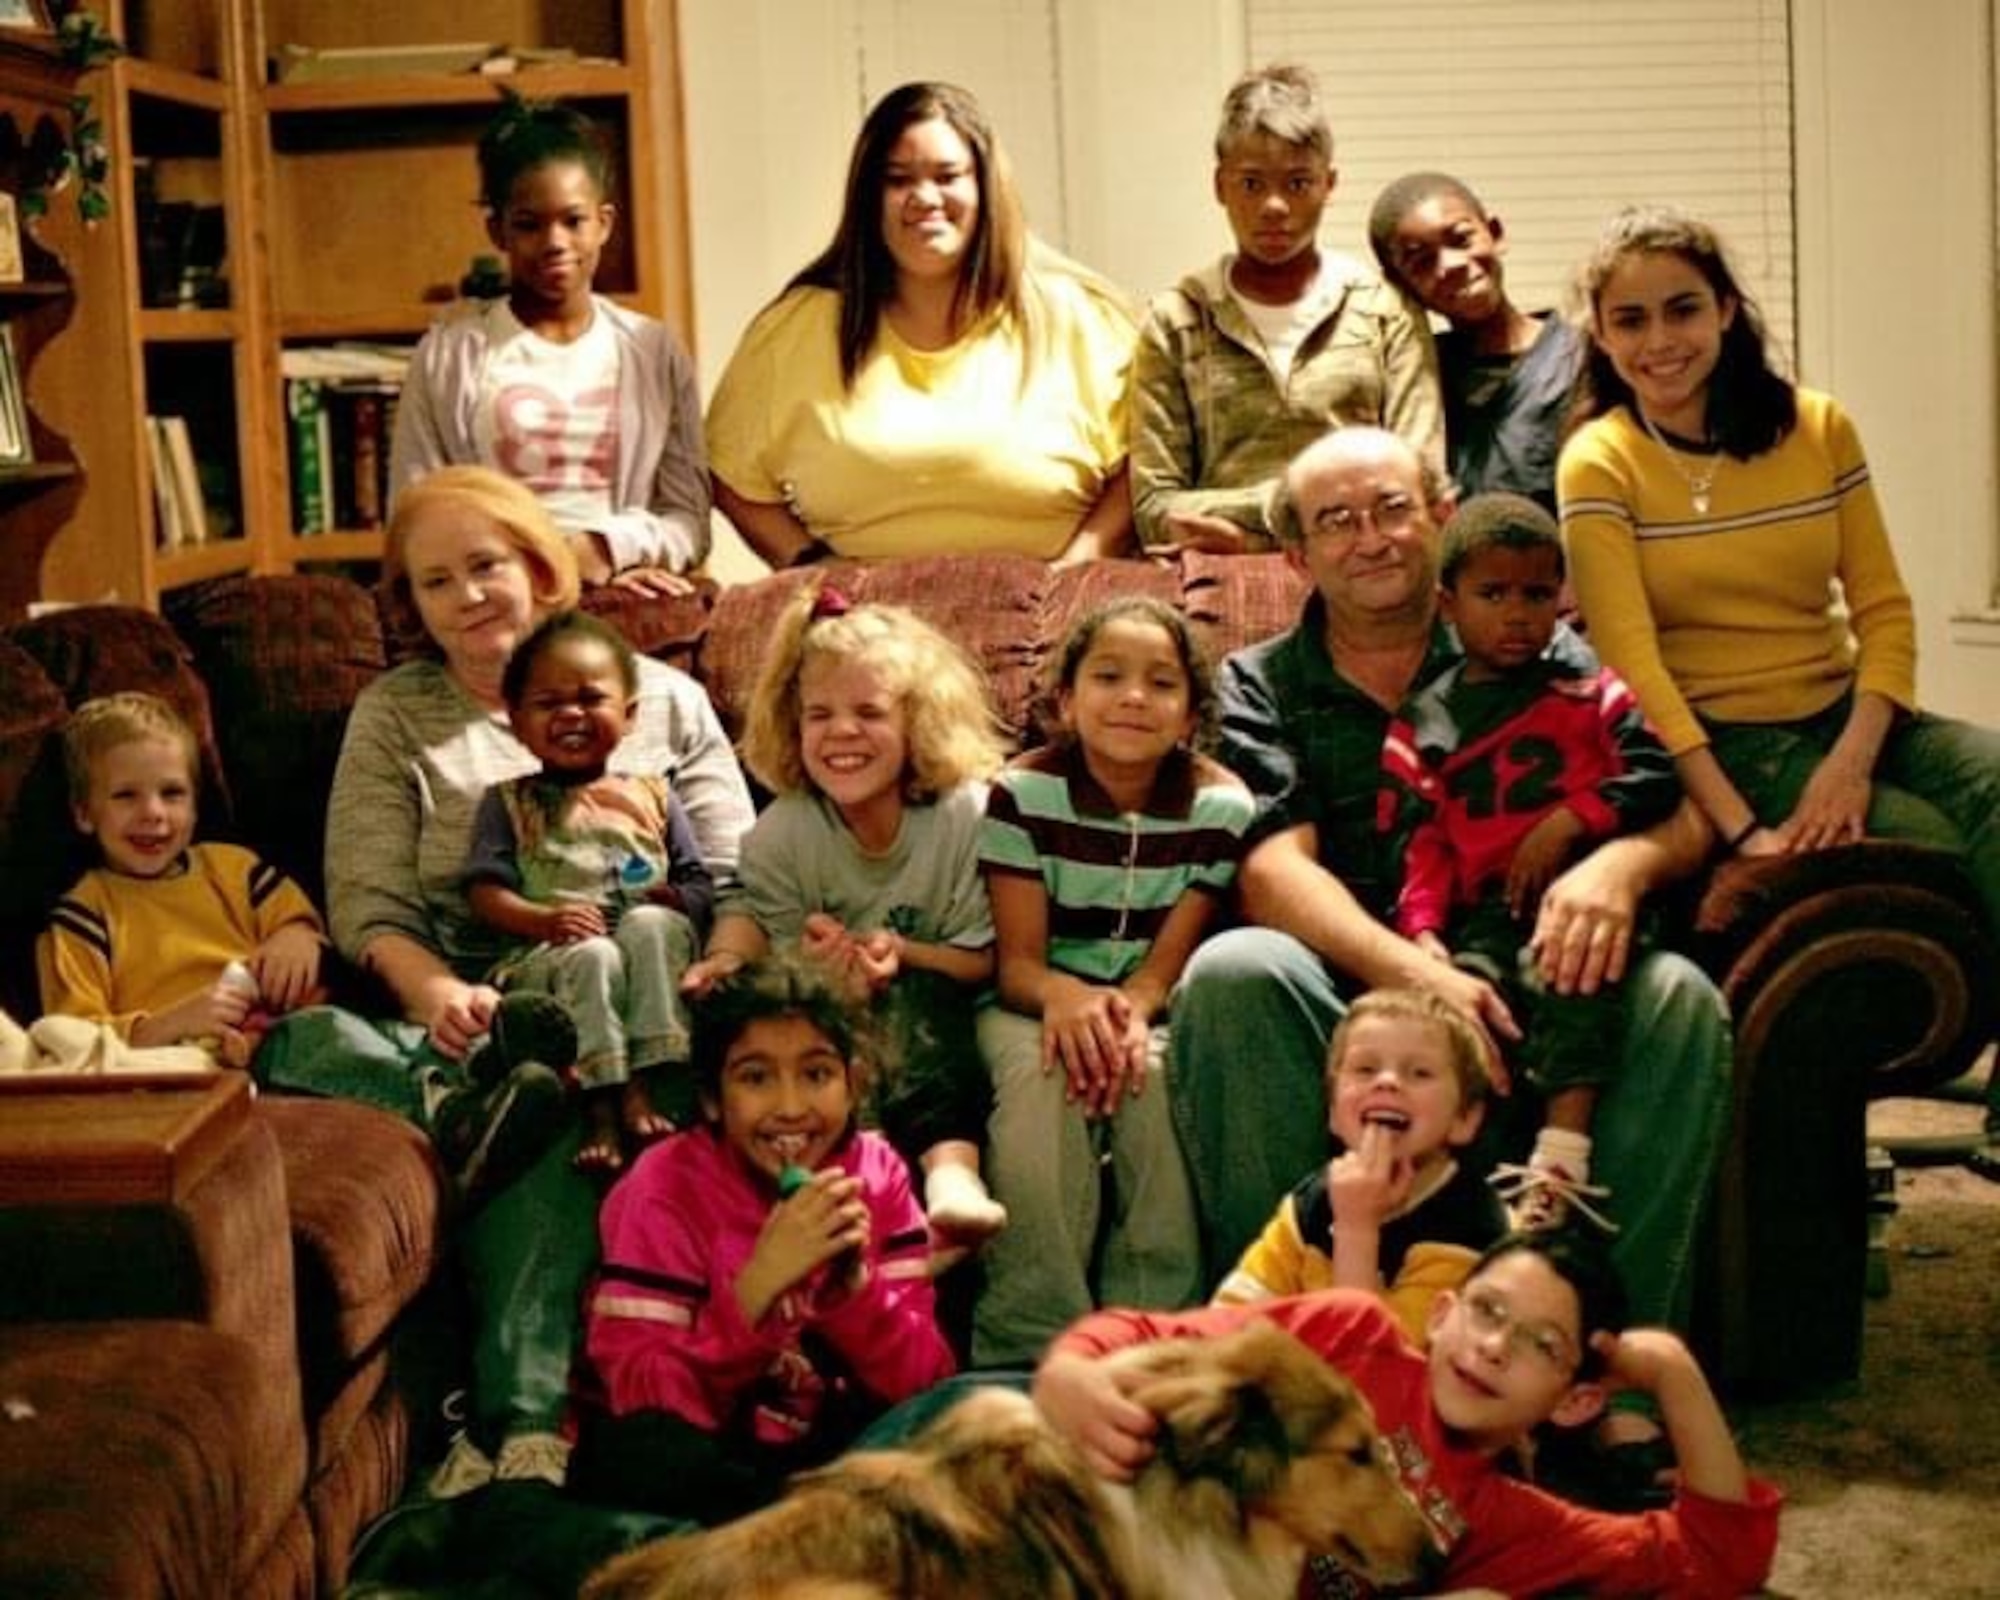 Airman 1st Class Jessica Makenna Martinez Greenlee, 36th Force Support Squadron services journeyman, bottom left, poses for a photo with her parents, Lonny and Donna Greenlee and 12 of her 20 other siblings from the Greenlee home in Wolfforth, Texas, November 24, 2005. Greenlee was placed in foster care at the age of three with three of her siblings. After being in a few homes, a couple from Lubbock, Texas showed interest in adopting all four of them, giving them the chance to grow up together with the company of 19 other children they had and adopted. (Courtesy photo)